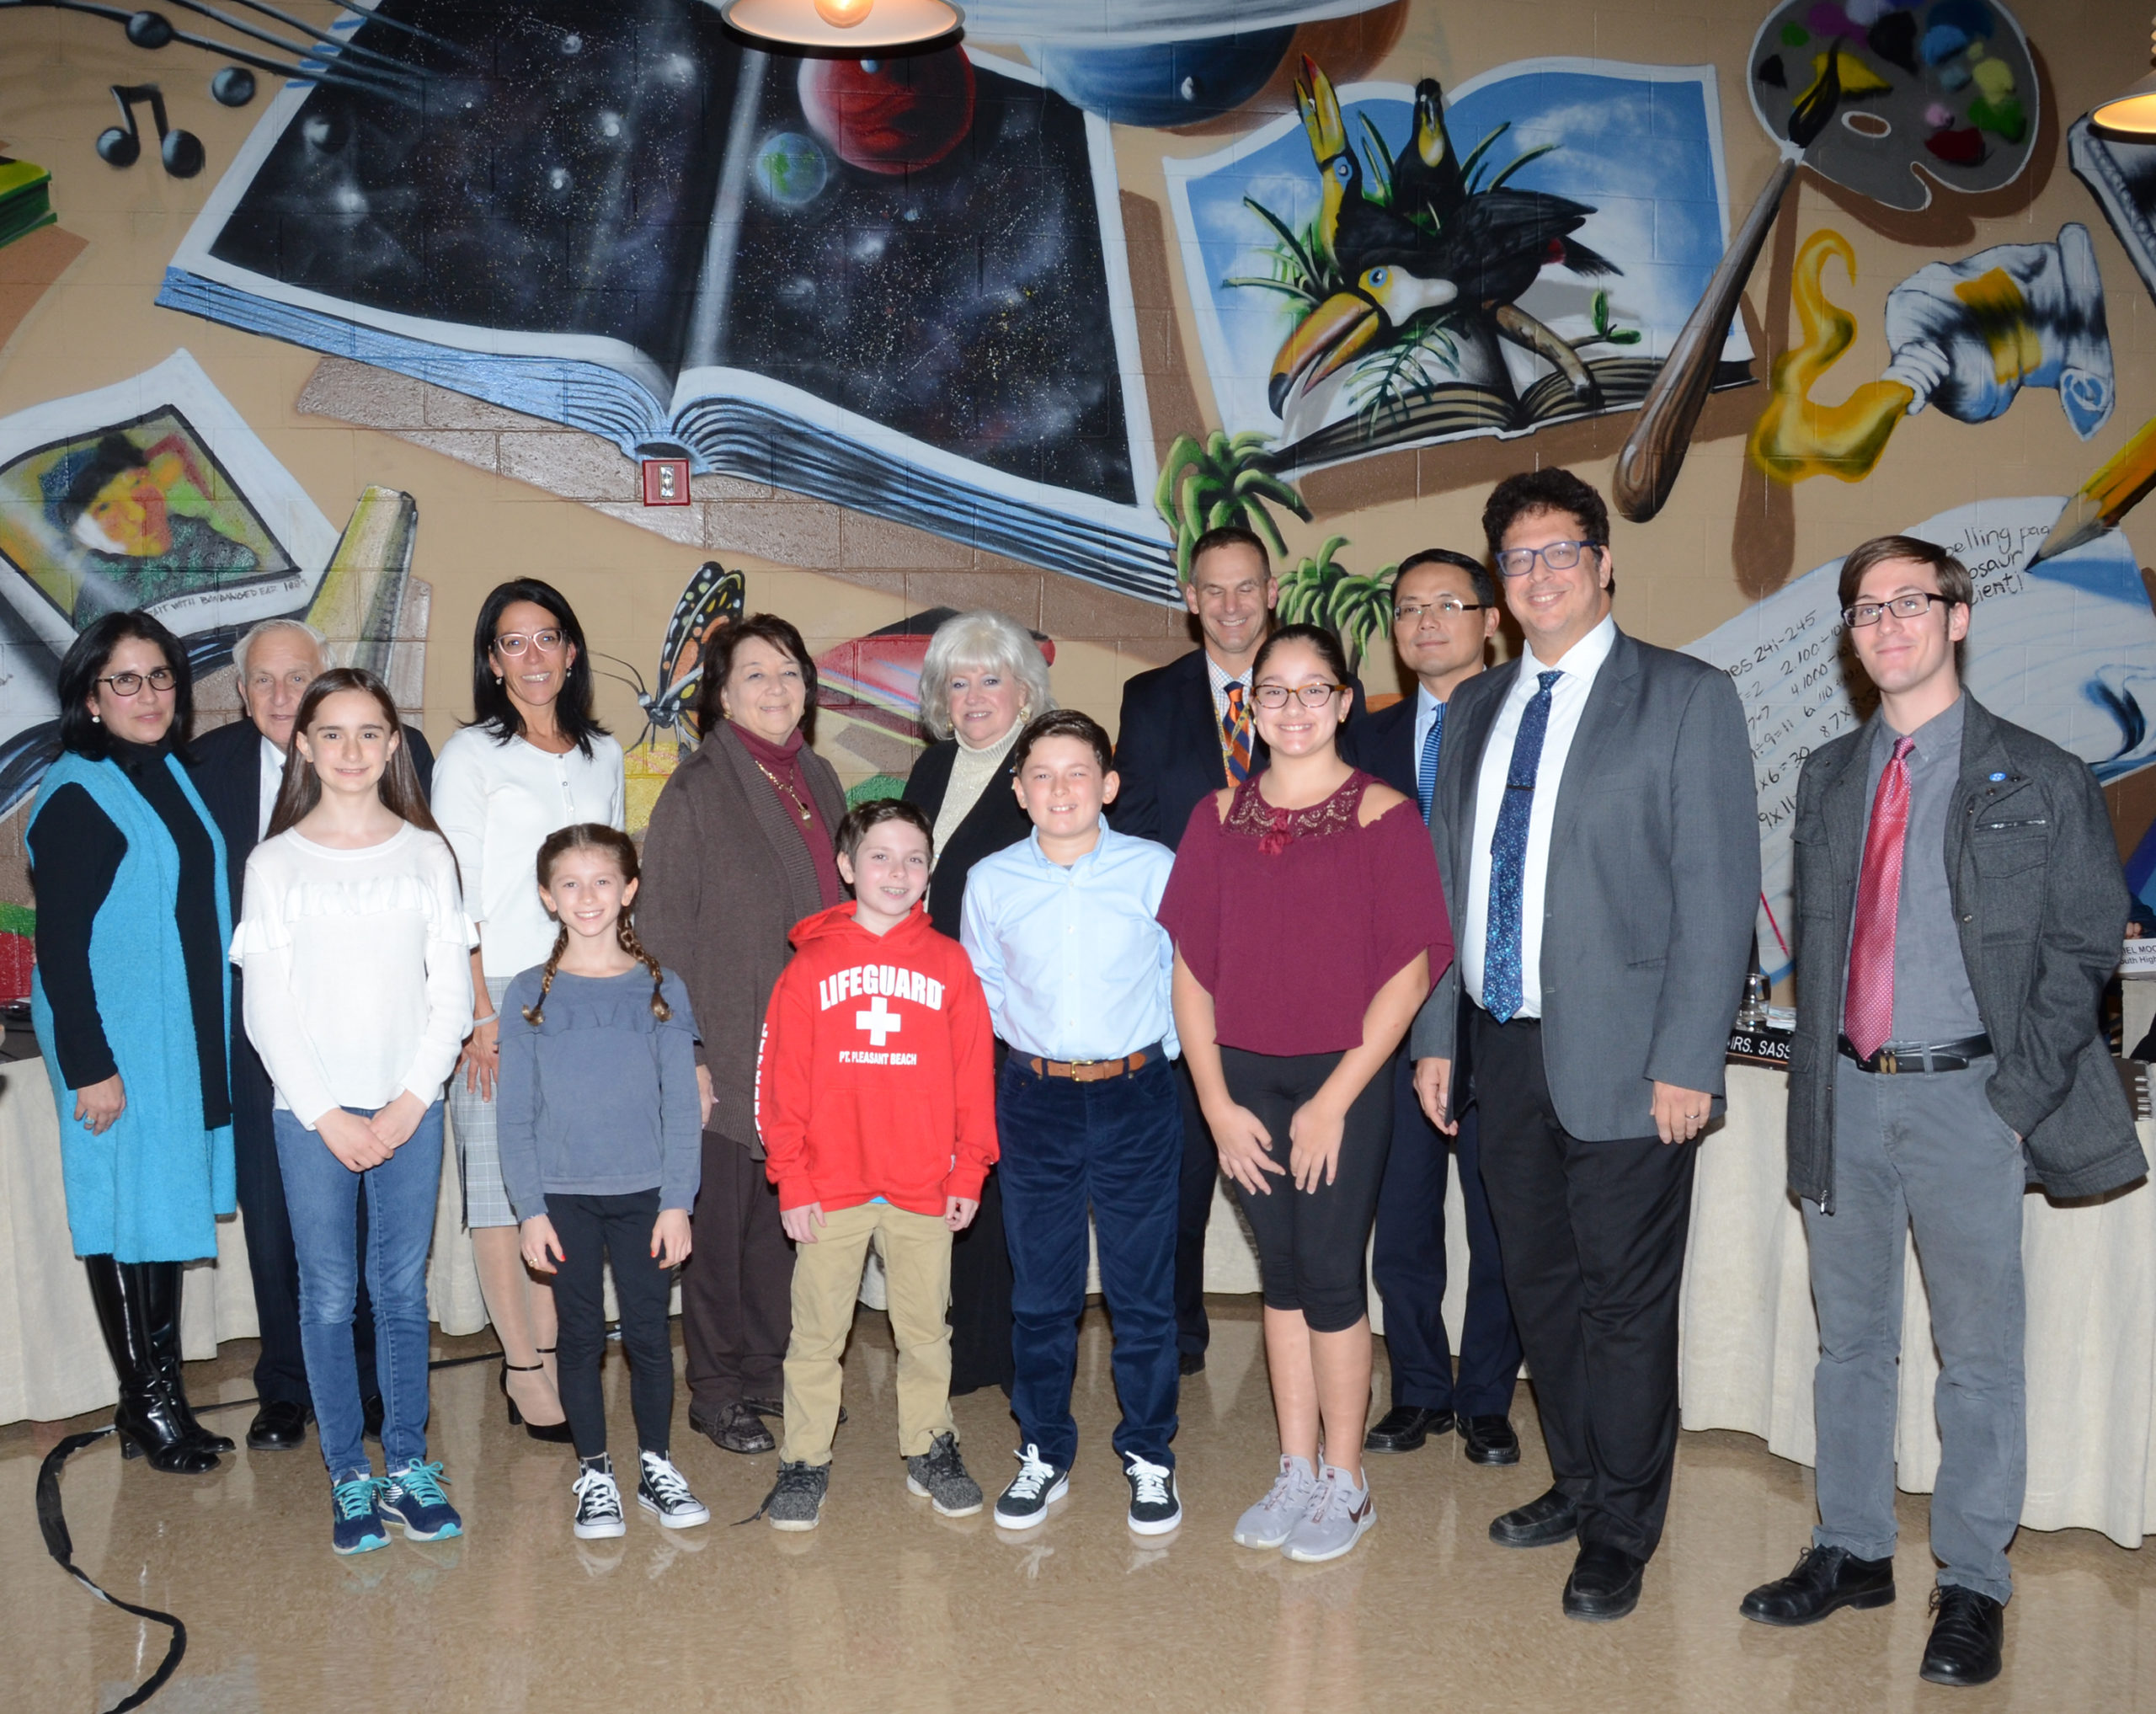 Students thanked the Great Neck Board of Education for the opportunities they have been provided. (Photo courtesy of the Great Neck Public Schools)